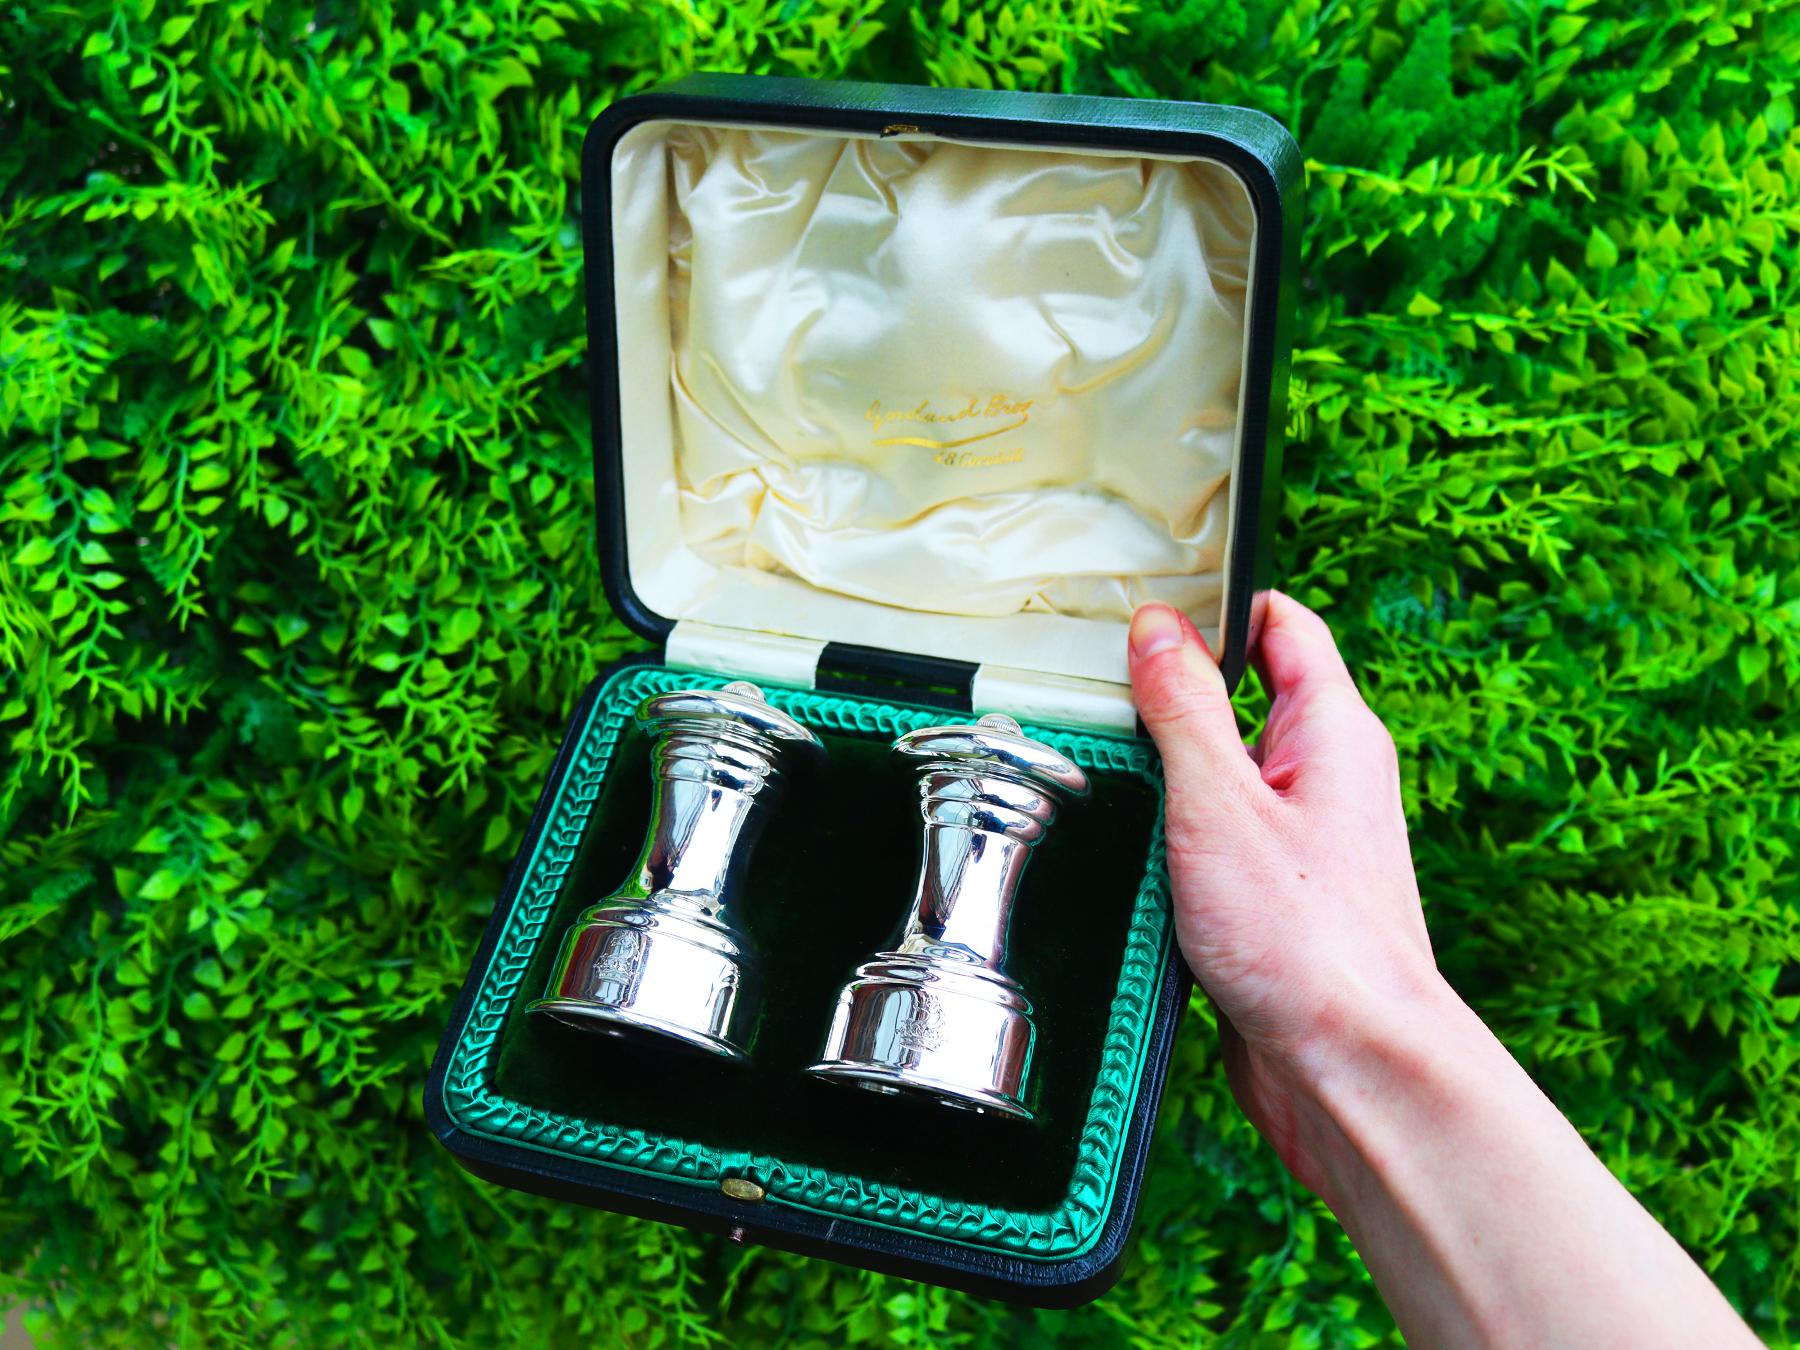 An exceptional, fine and impressive pair of antique Edwardian English sterling silver pepper grinders - boxed; an addition to our collectable silver collection.

These exceptional antique sterling silver pepper grinders have a circular baluster